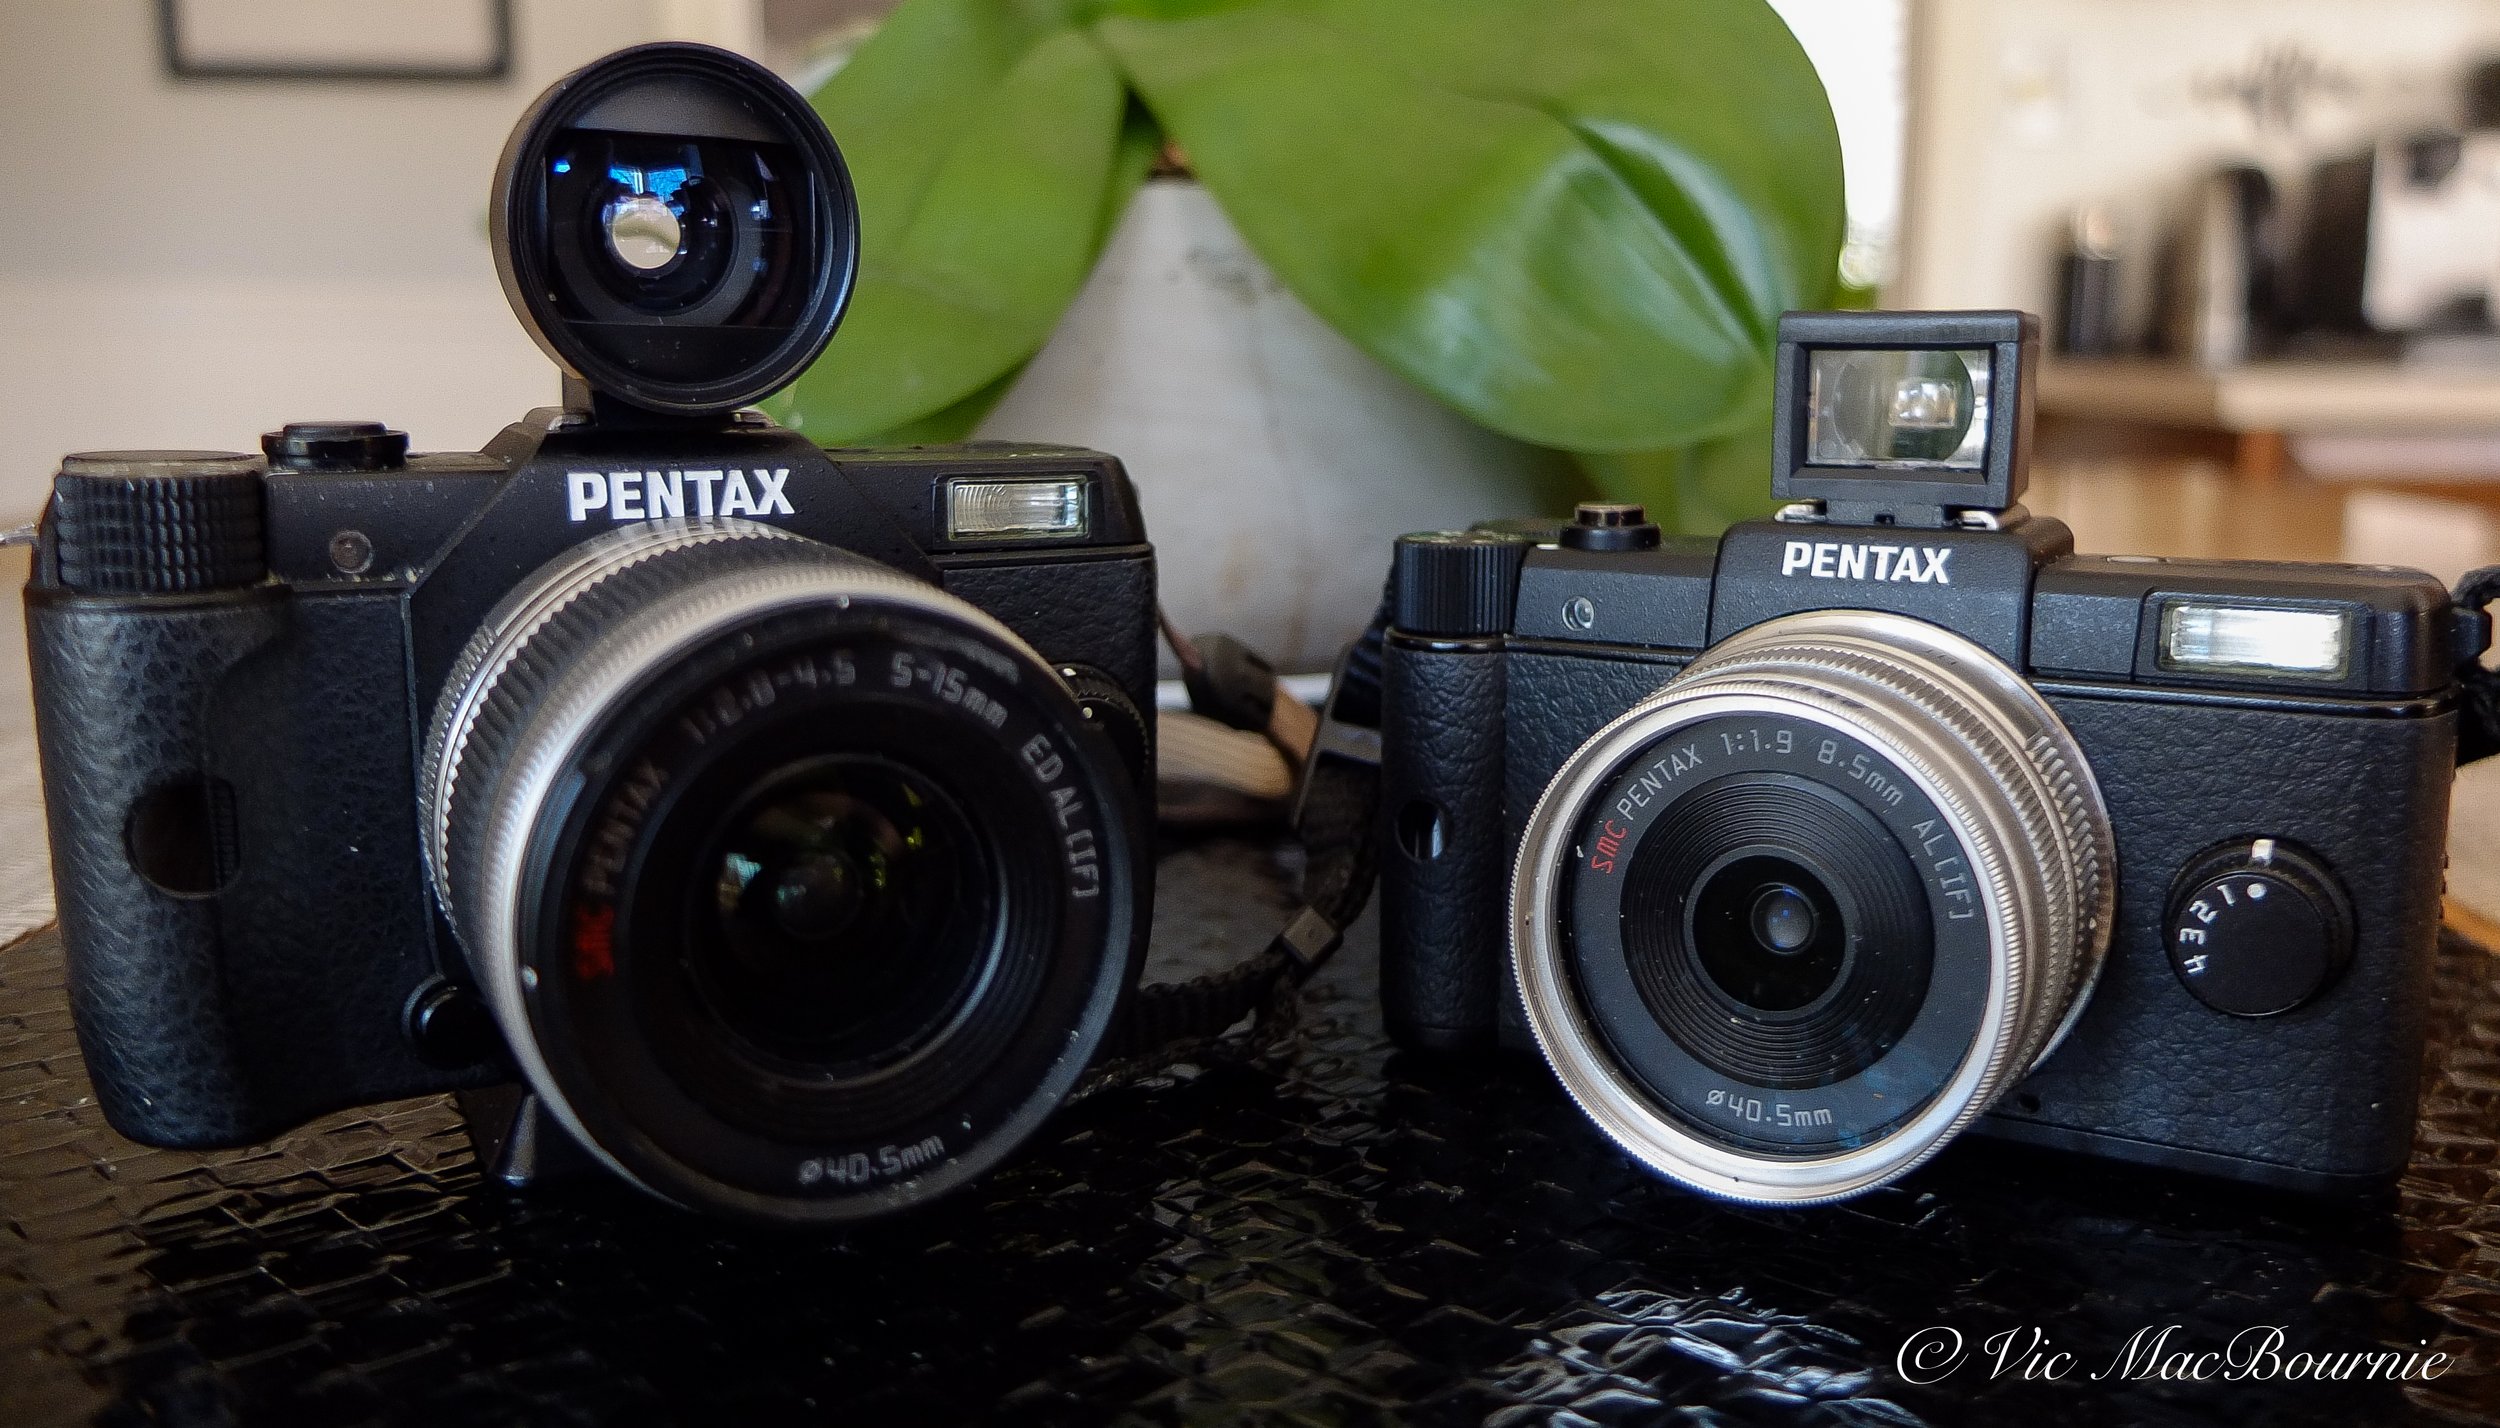 Pentax Q cameras fitted with external optional viewfinders.